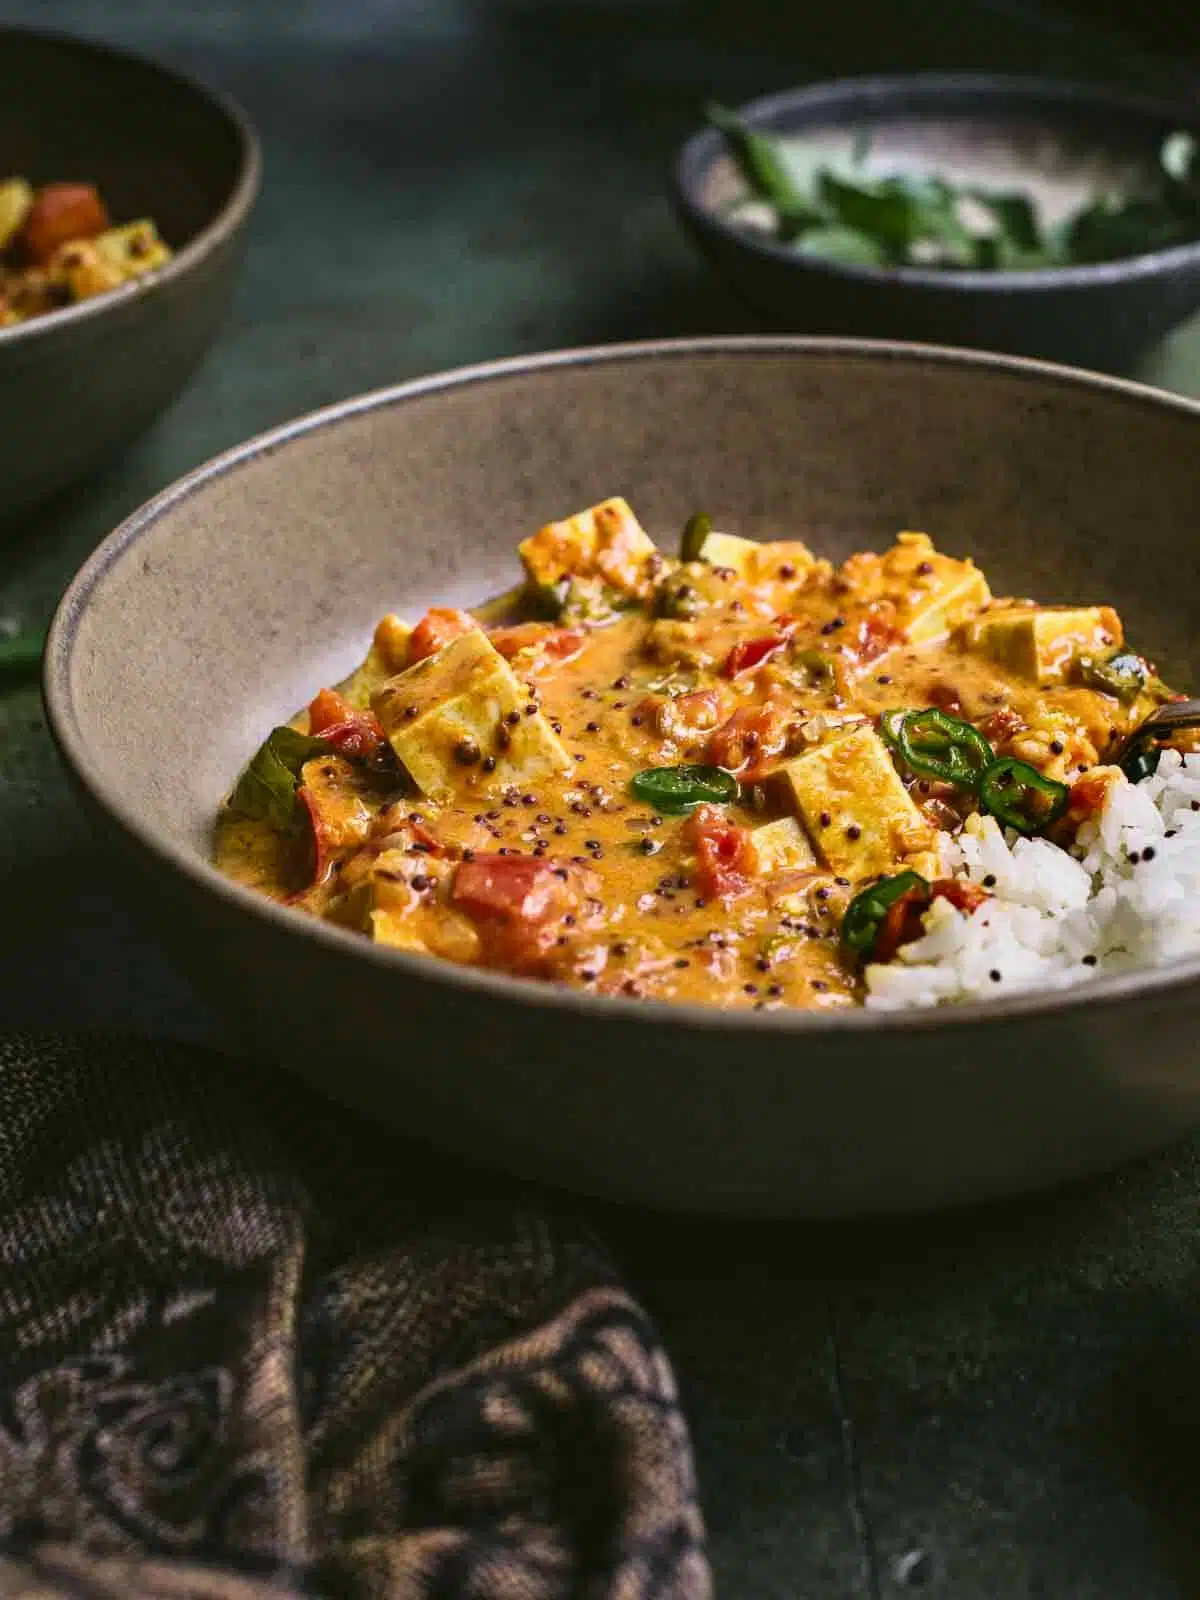 A bowl of tofu curry with rice and greens.